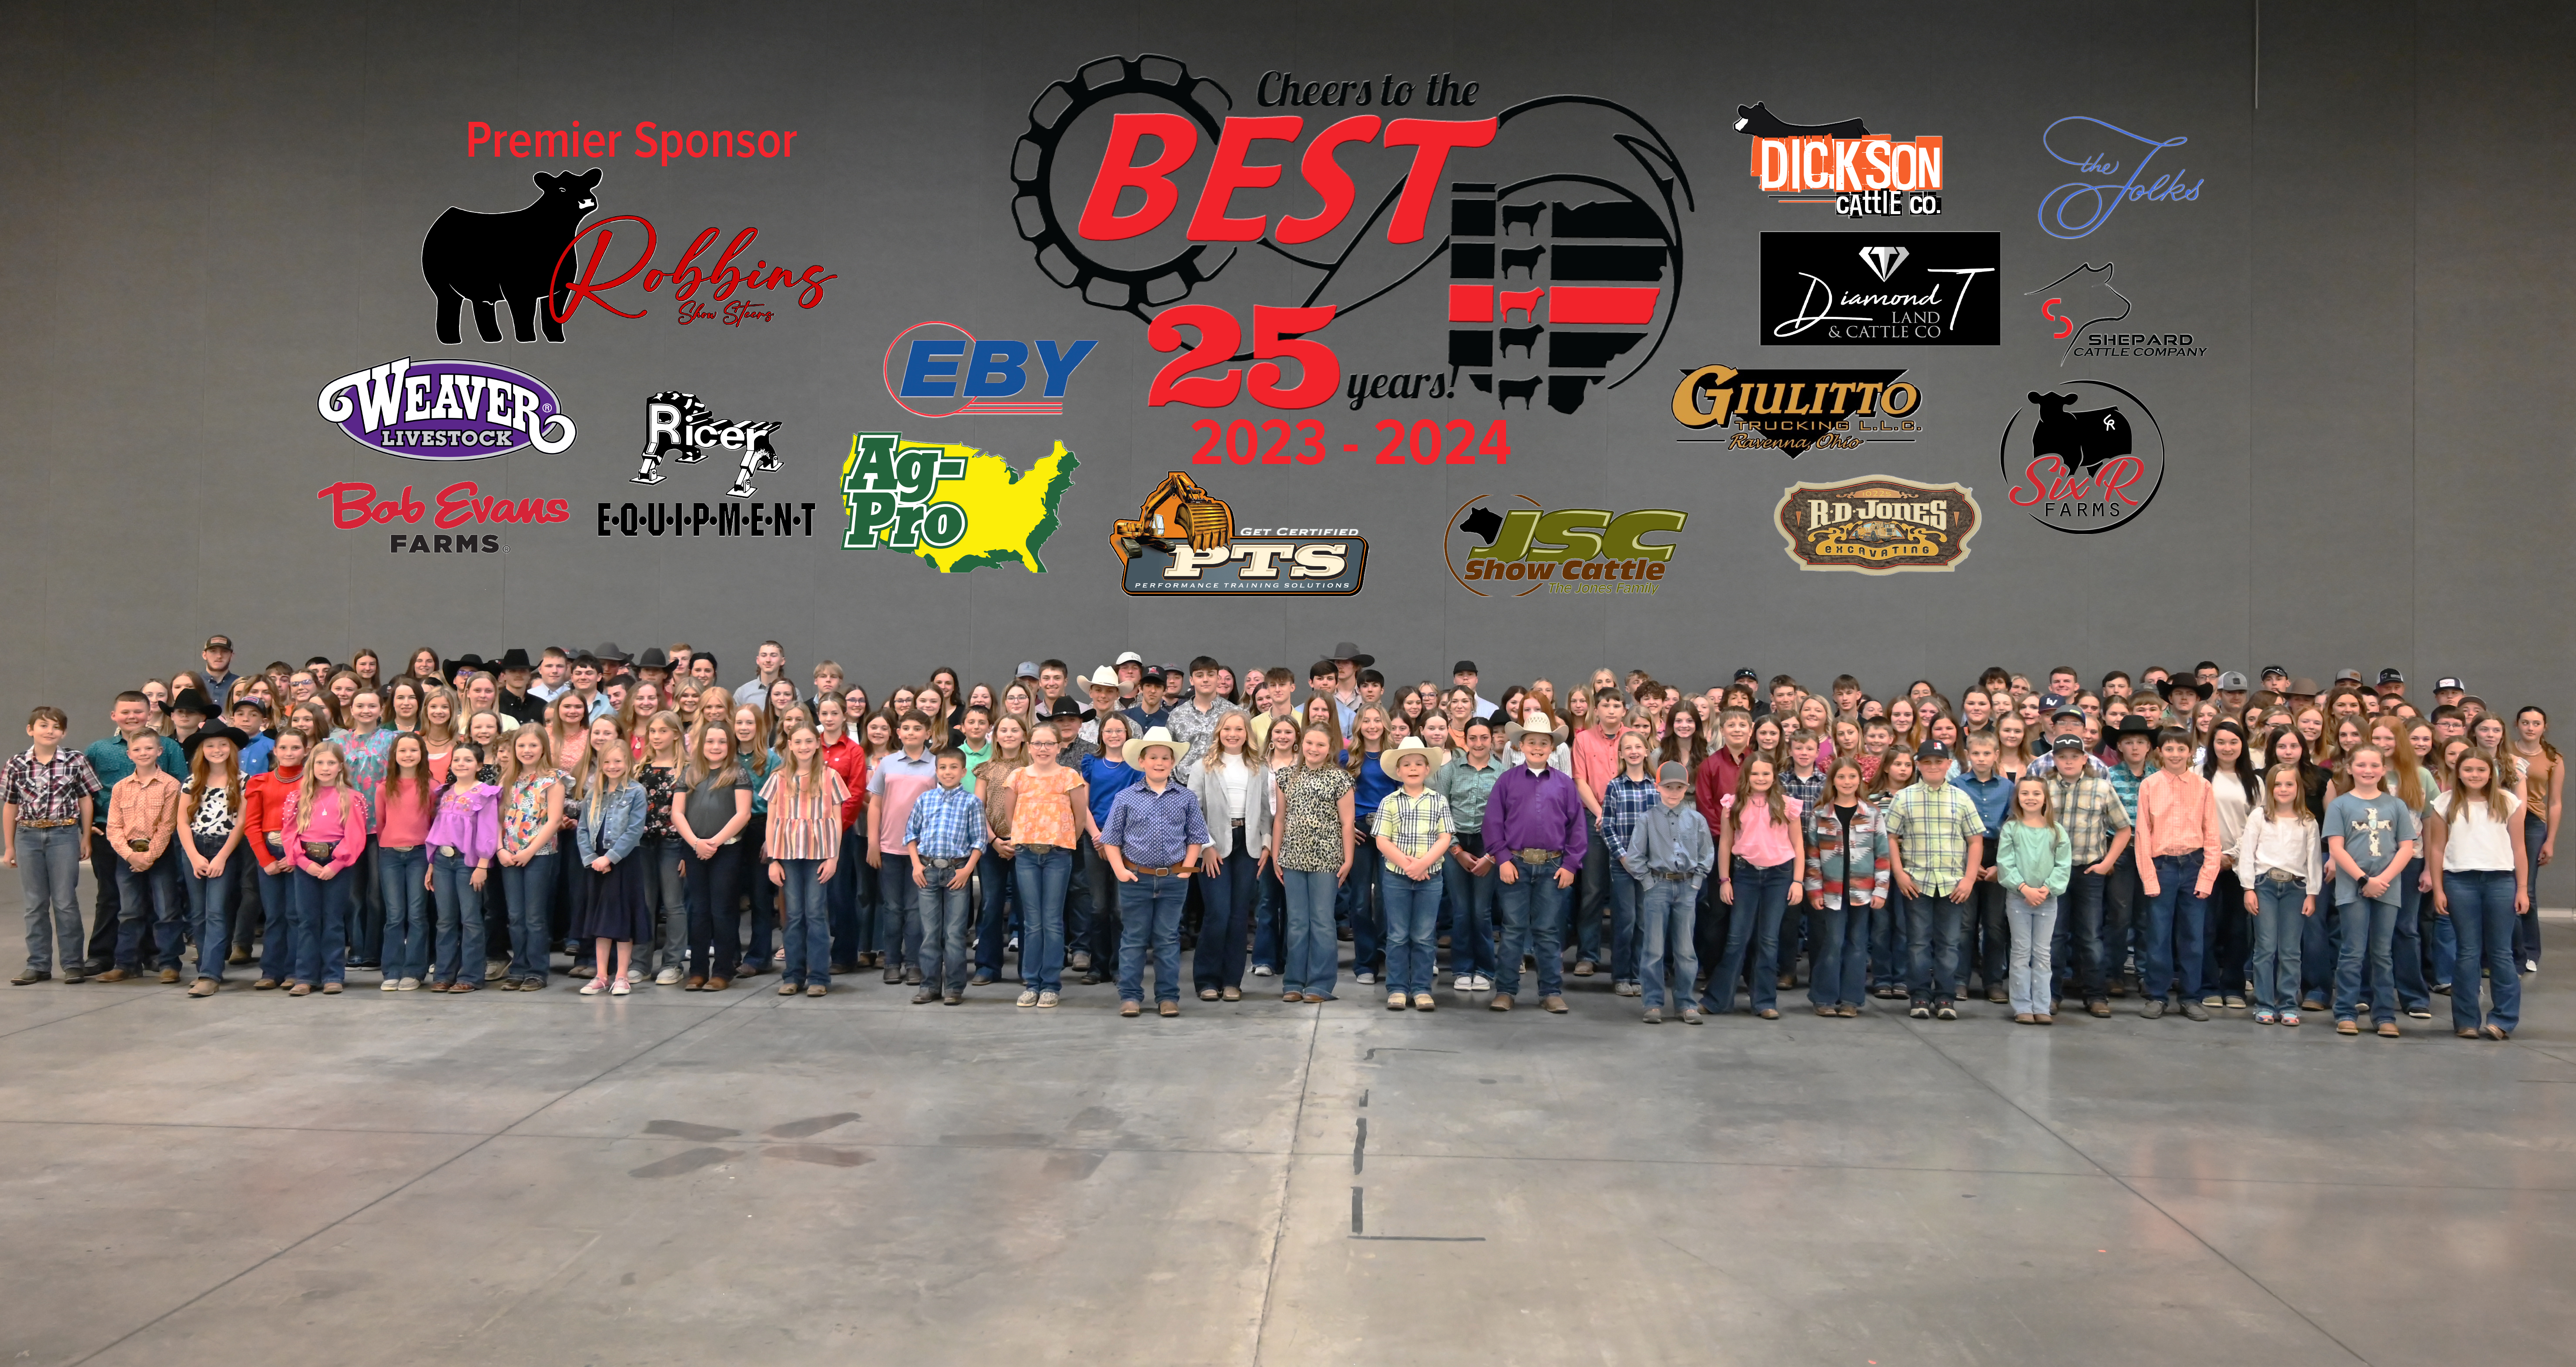 Cattlemen youth awarded for a successful 25th anniversary BEST season